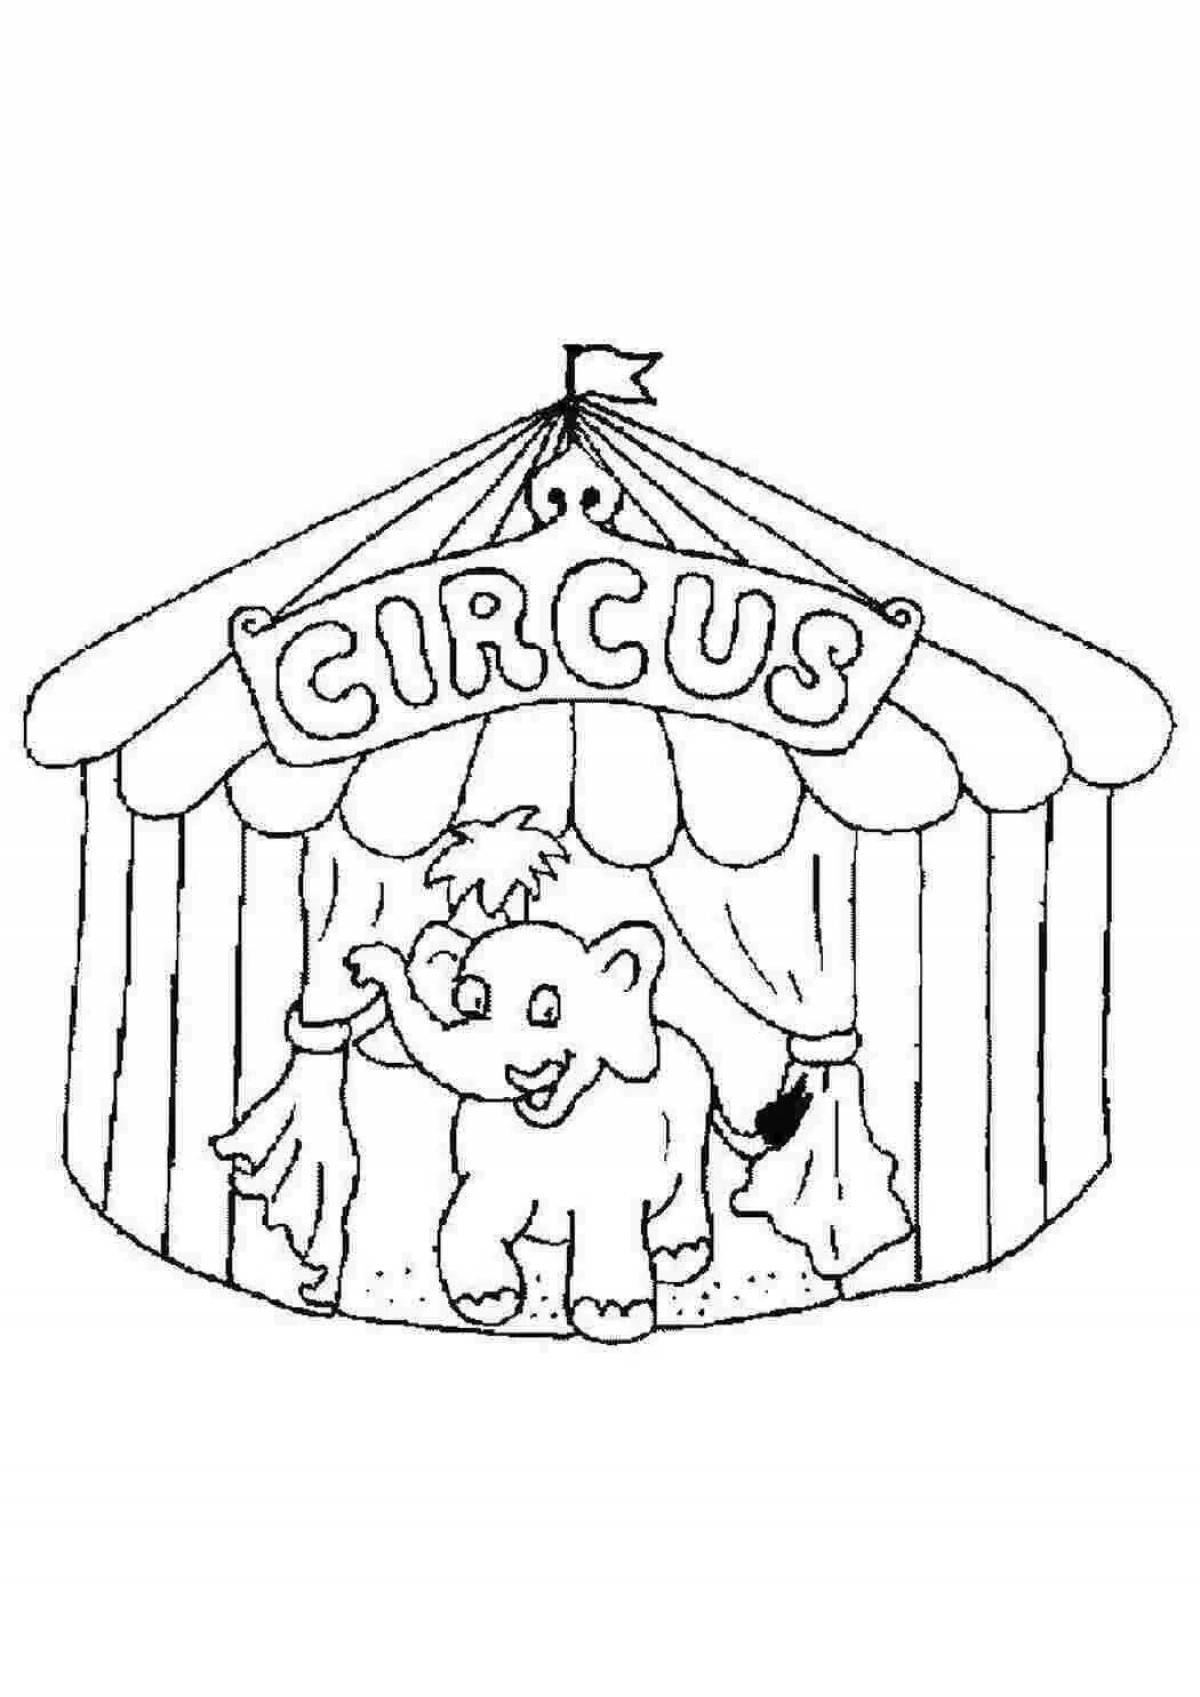 Exotic circus coloring page